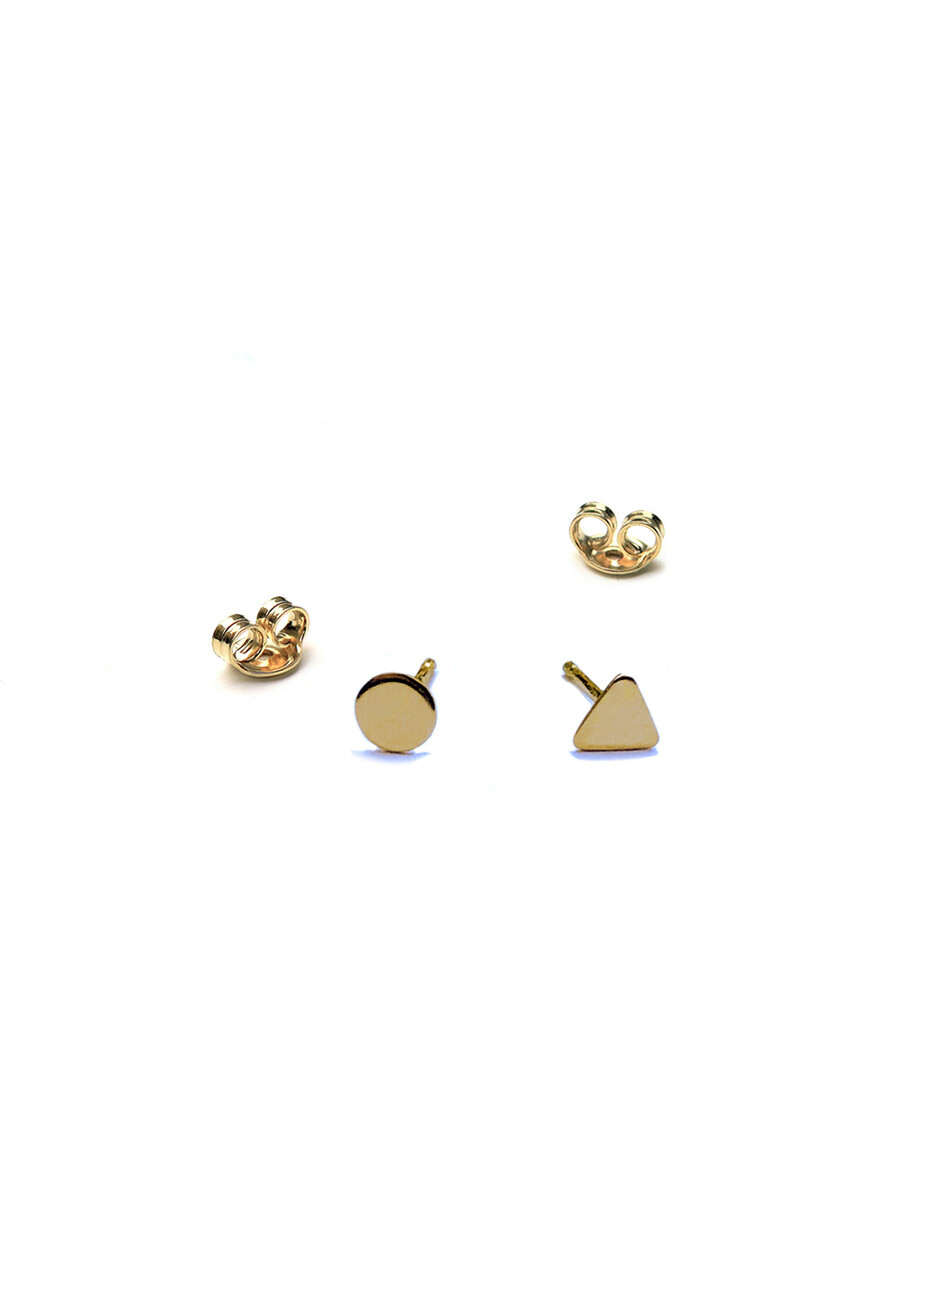 Micro triangle or disk stud earring in 18kt solid gold